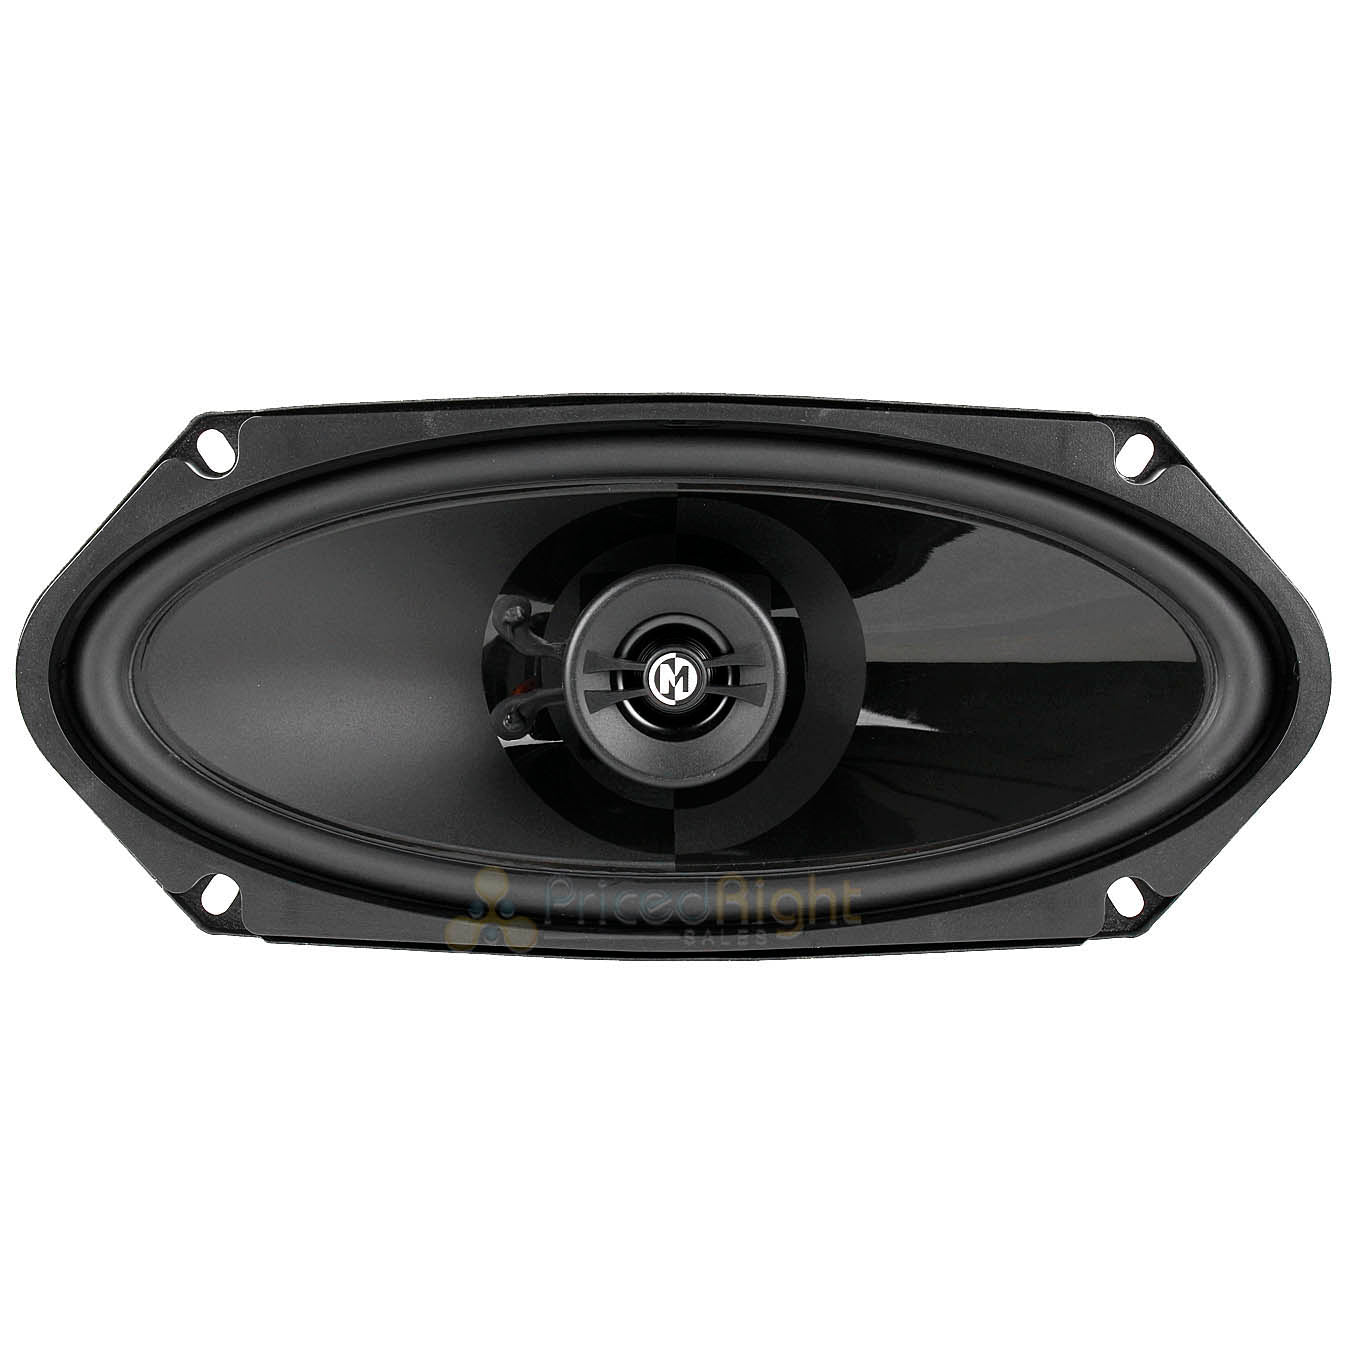 Memphis Audio 4x10" 2 Way Coaxial Speaker 100 Watts Max Power Reference 2 Pair